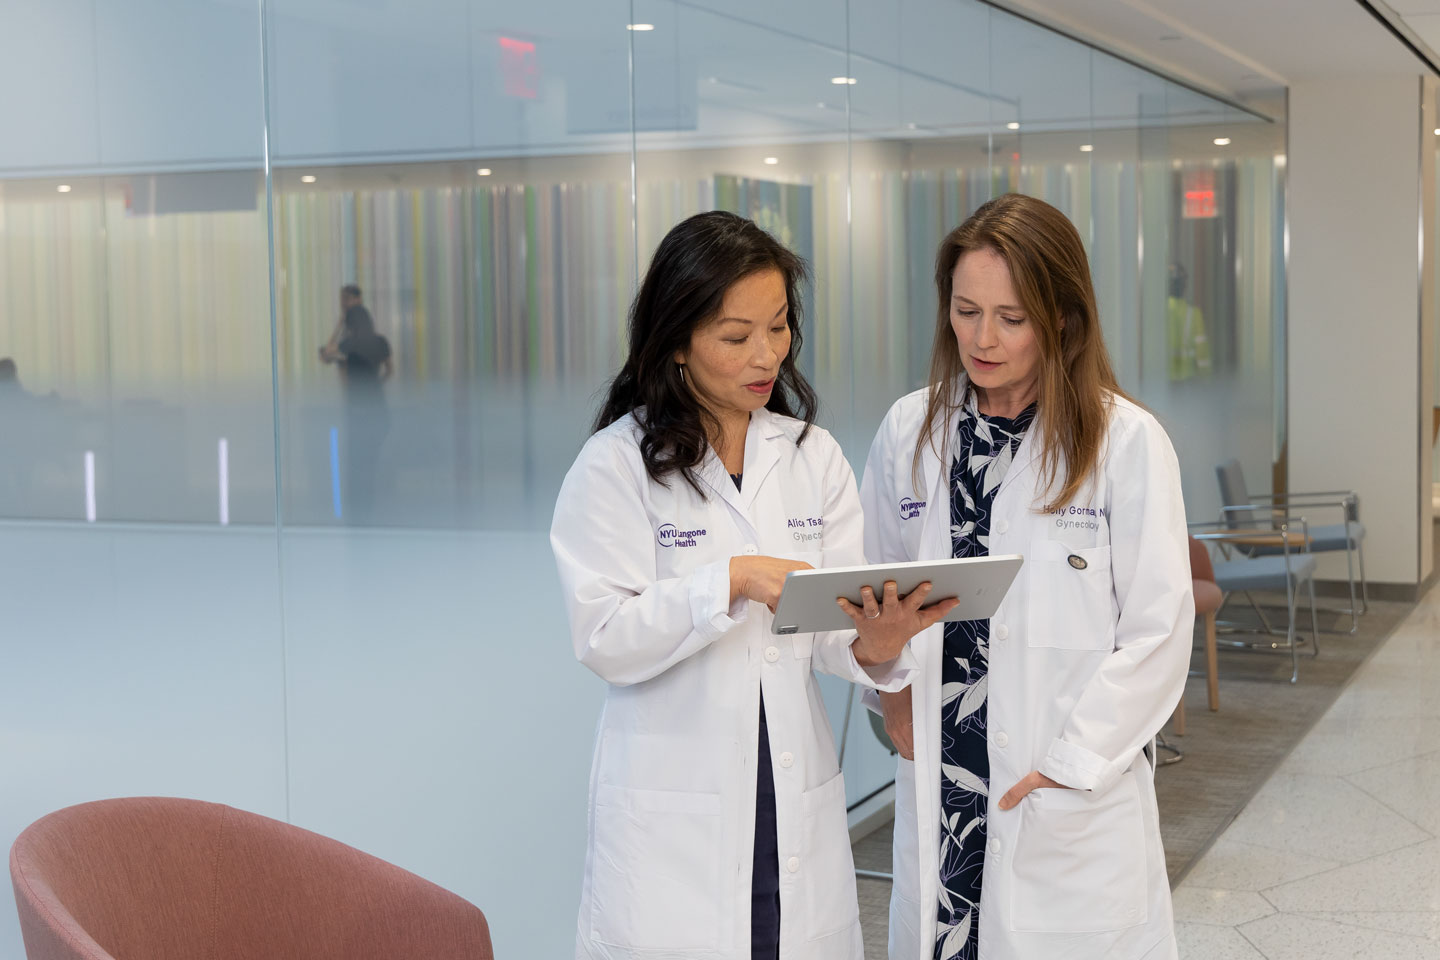 Dr. Alice K. Tsai and Nurse Practitioner Holly O. Gorman Talk While Looking at Tablet